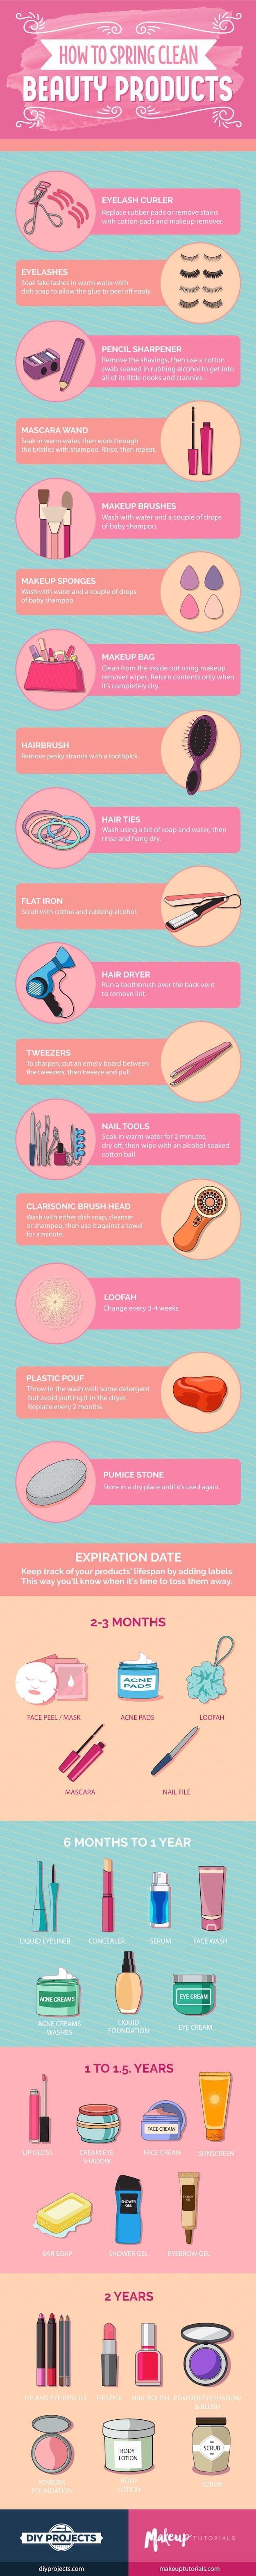 Spring Cleaning Tips for Your Beauty Products